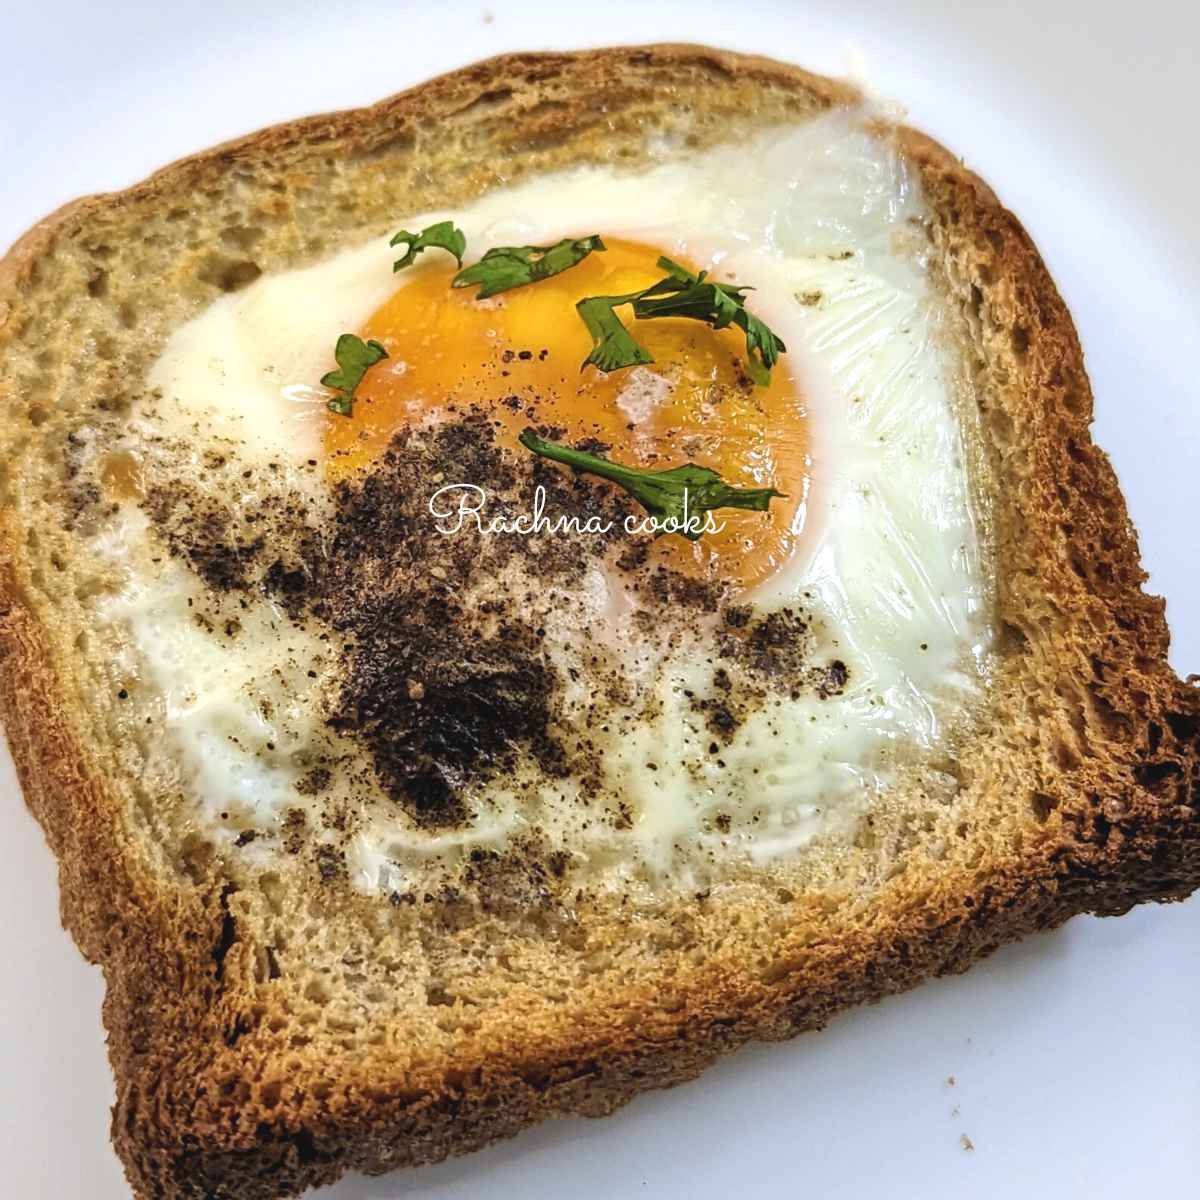 Toasted bread with egg in the hole in the center